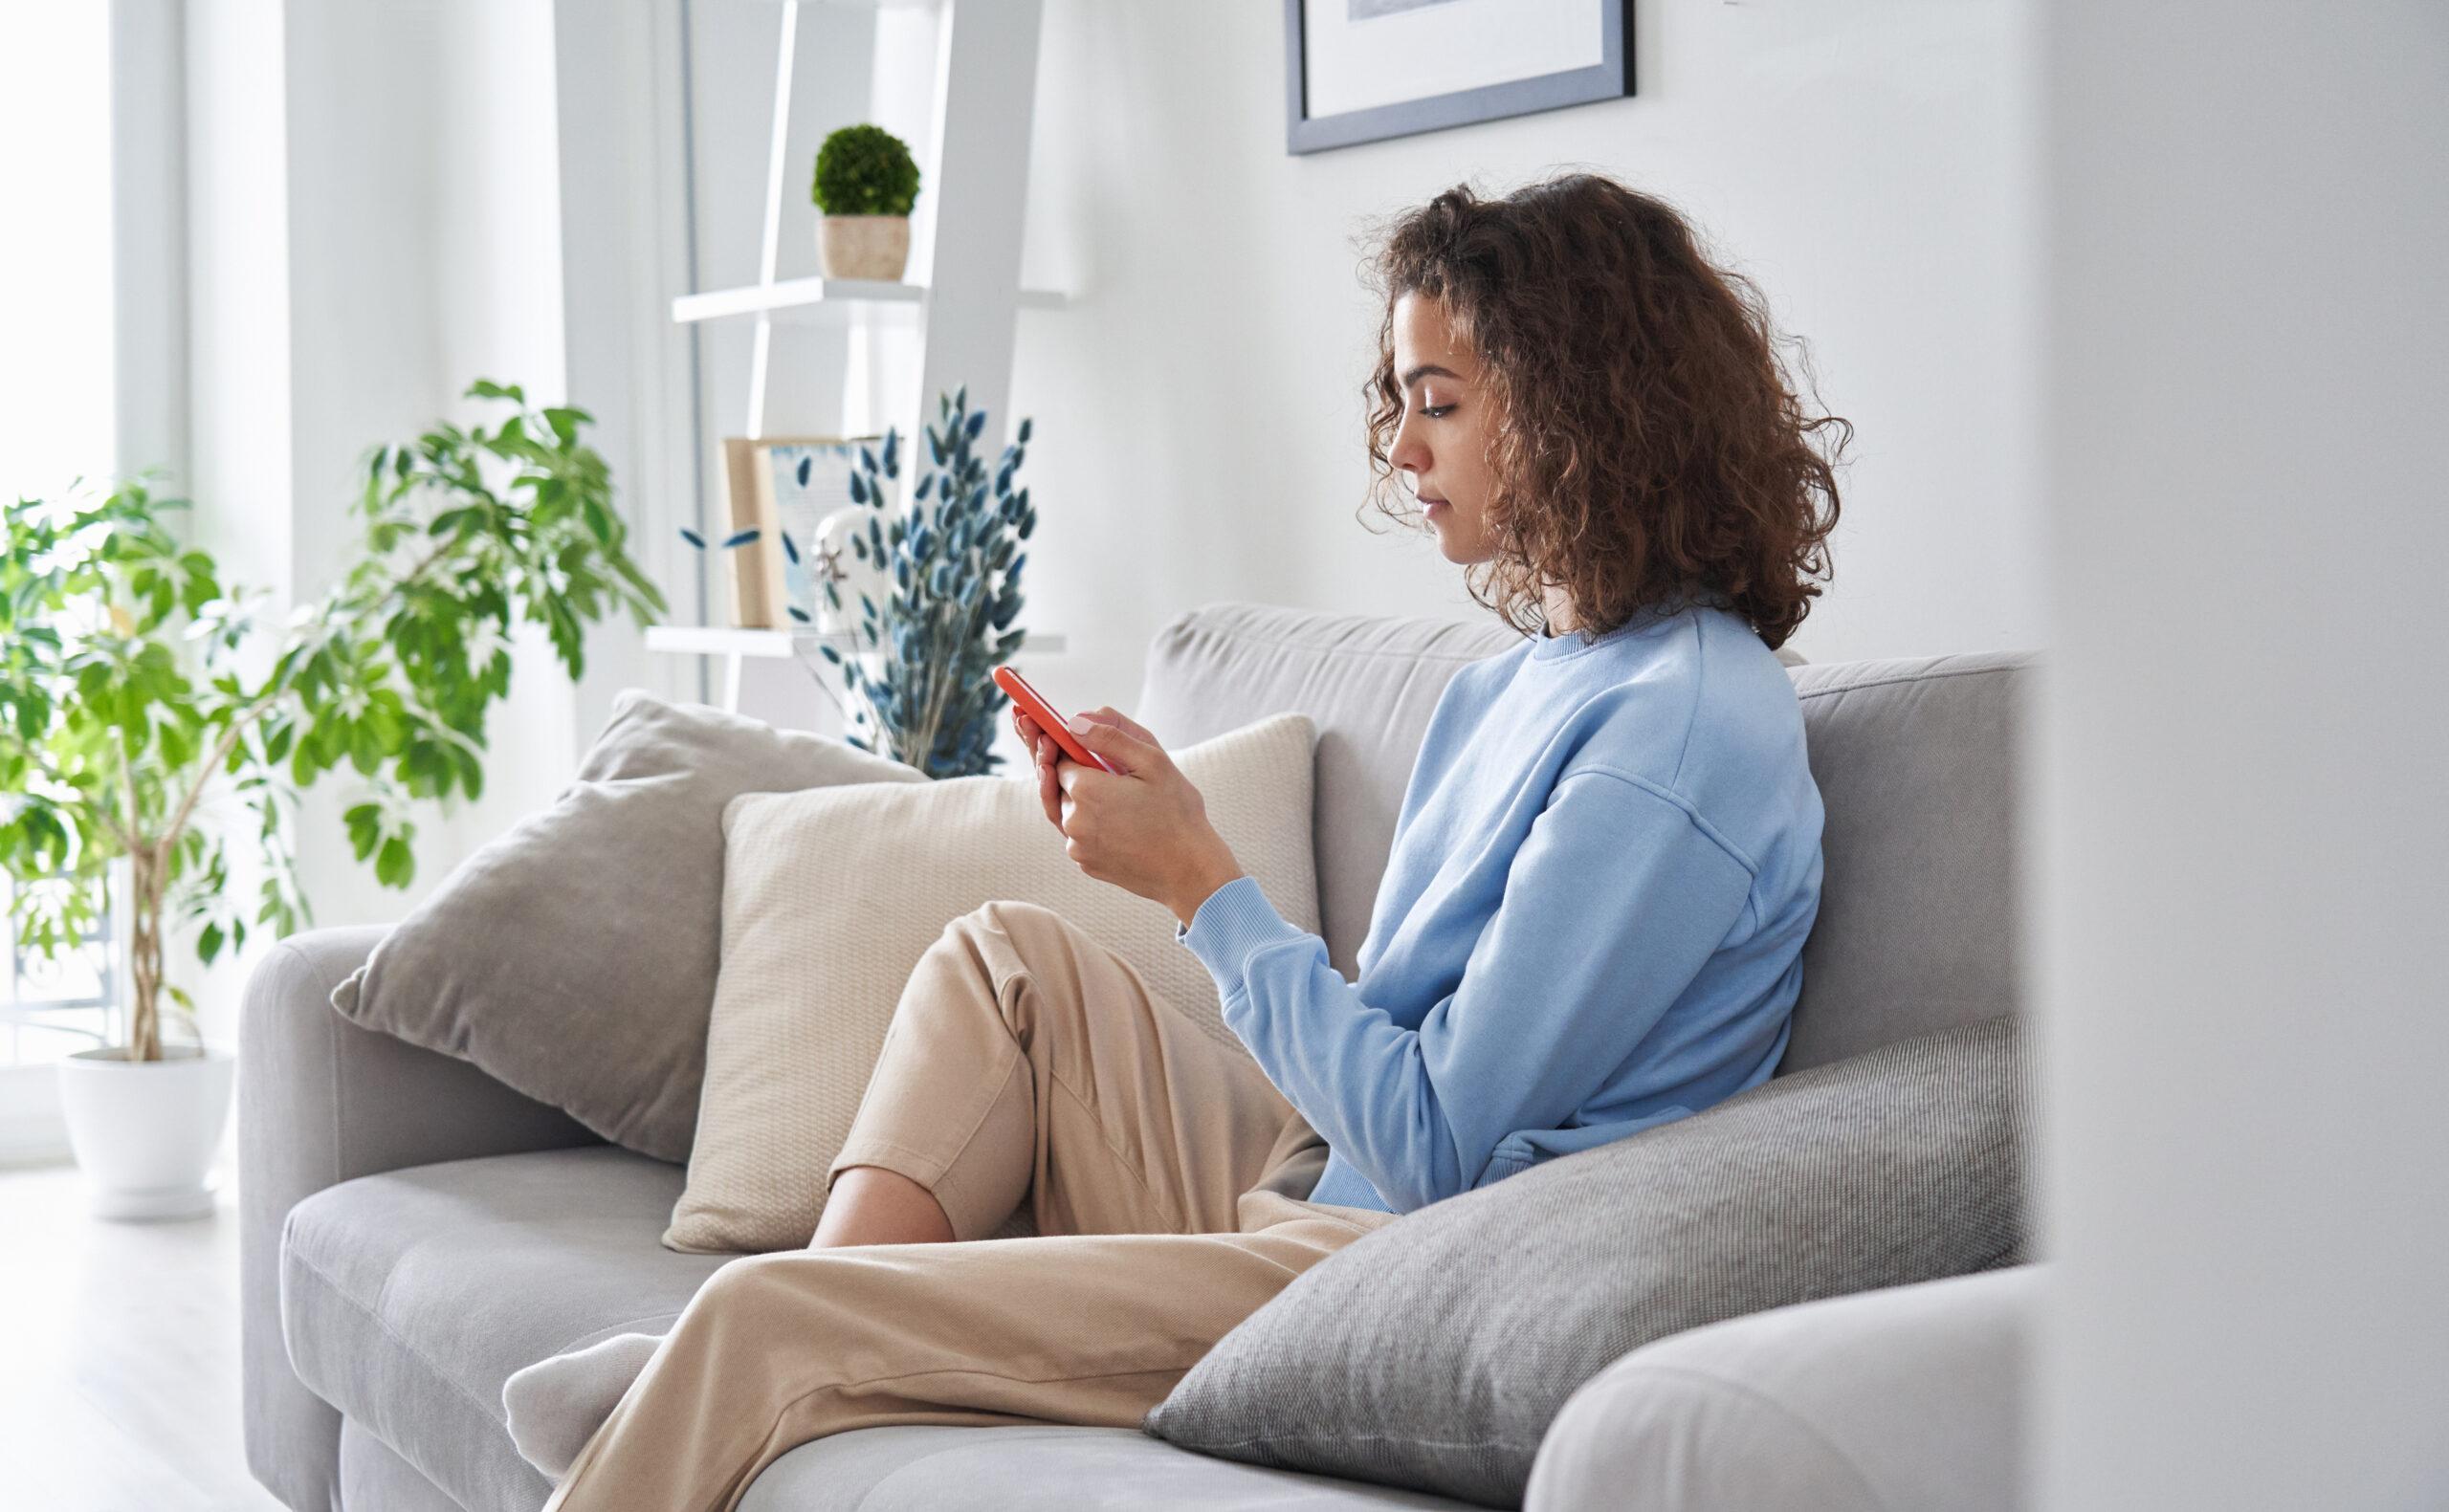 Woman using her smartphone while sitting on a sofa